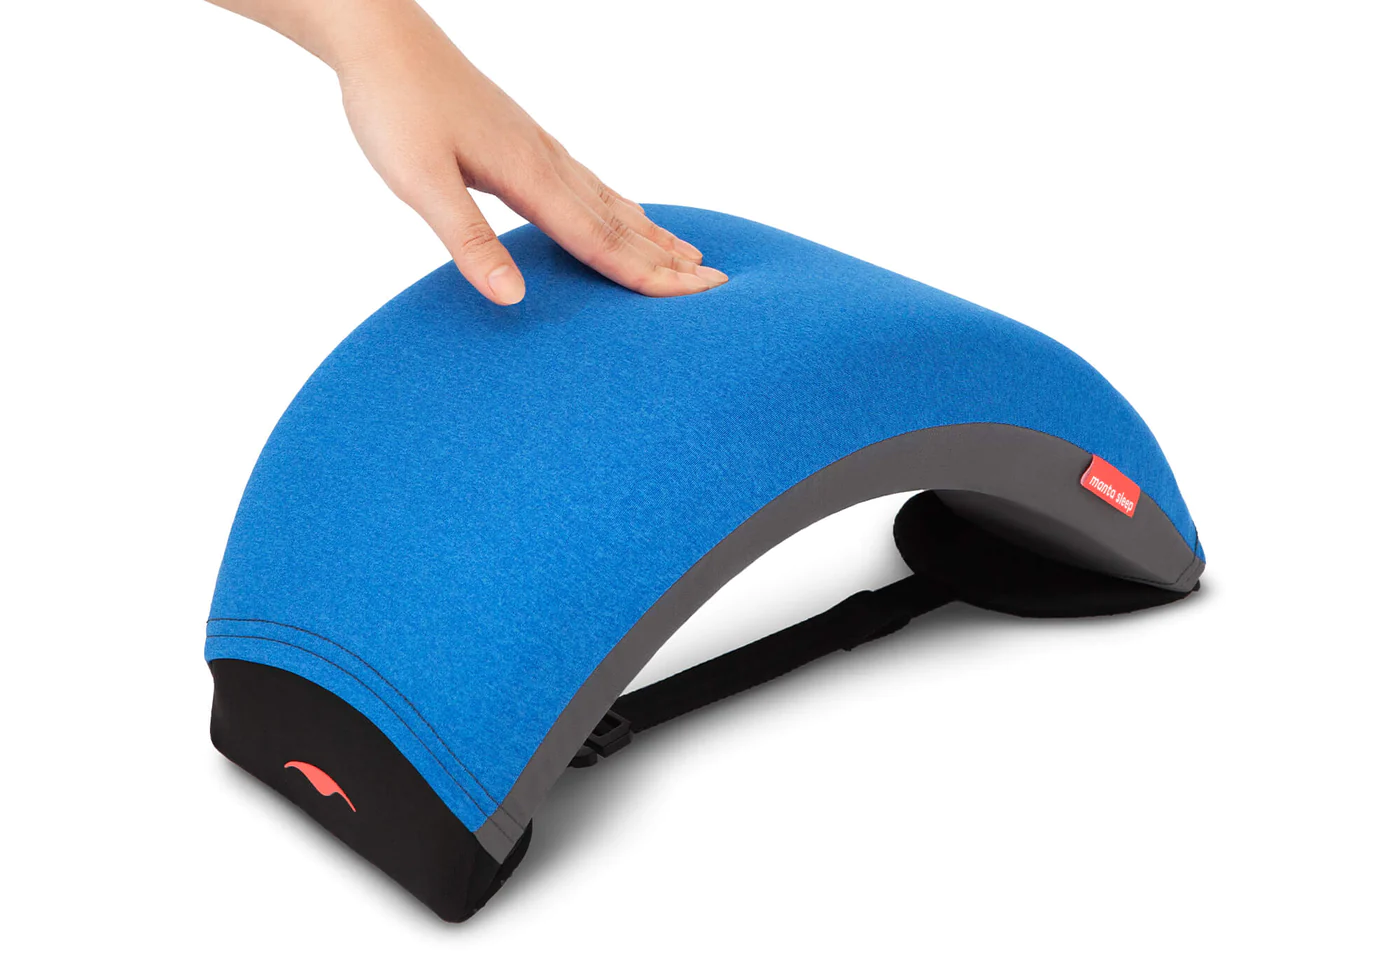 A hand pressing on the surface of a blue napping pillow with an arc design.